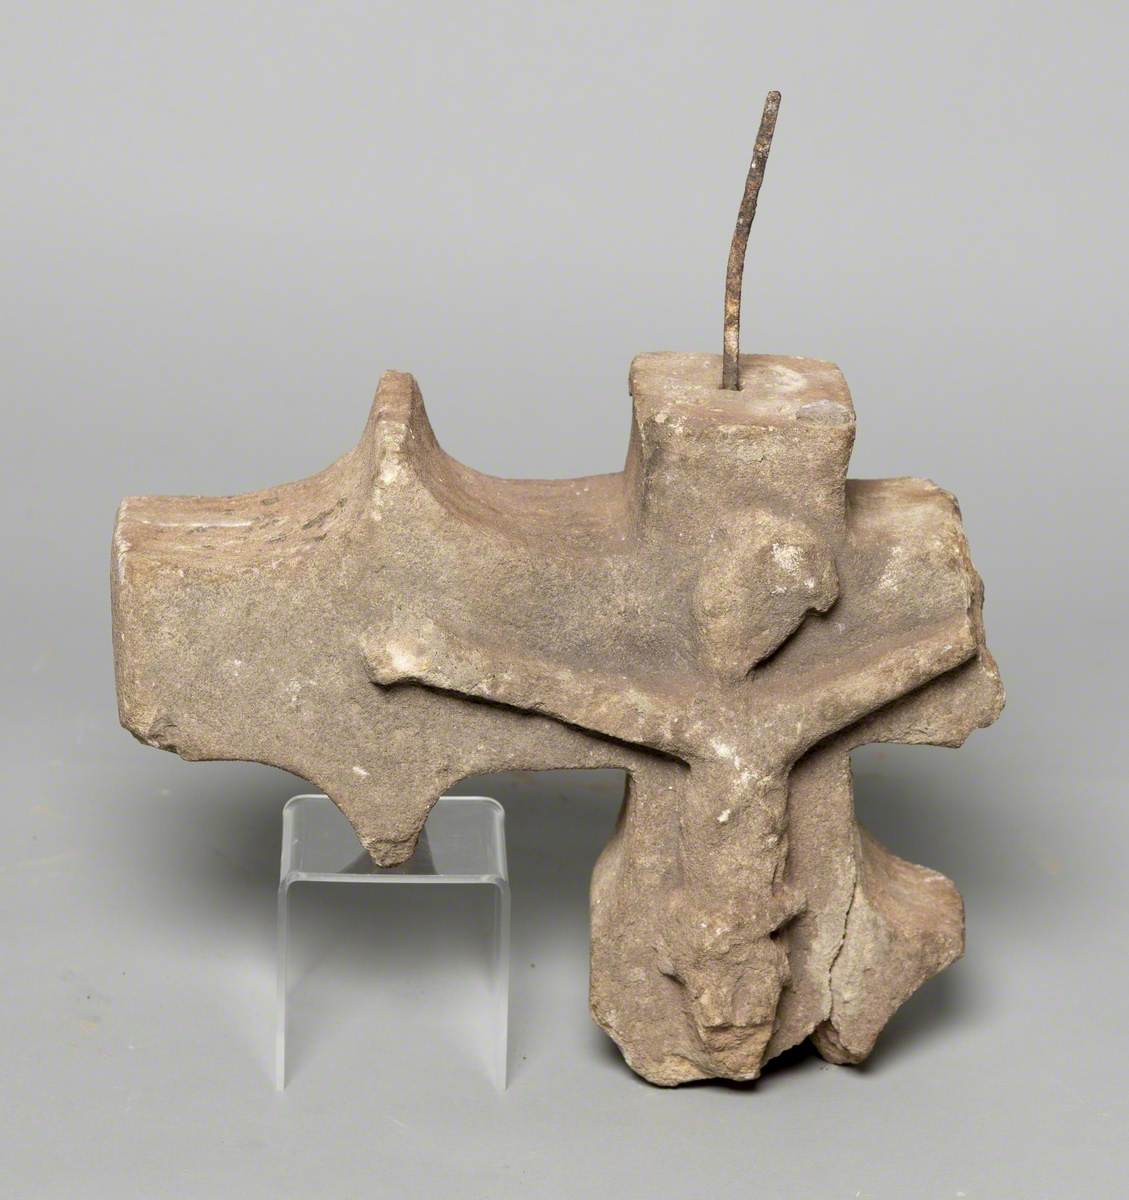 Part of a Stone Cross Featuring the Crucifixion